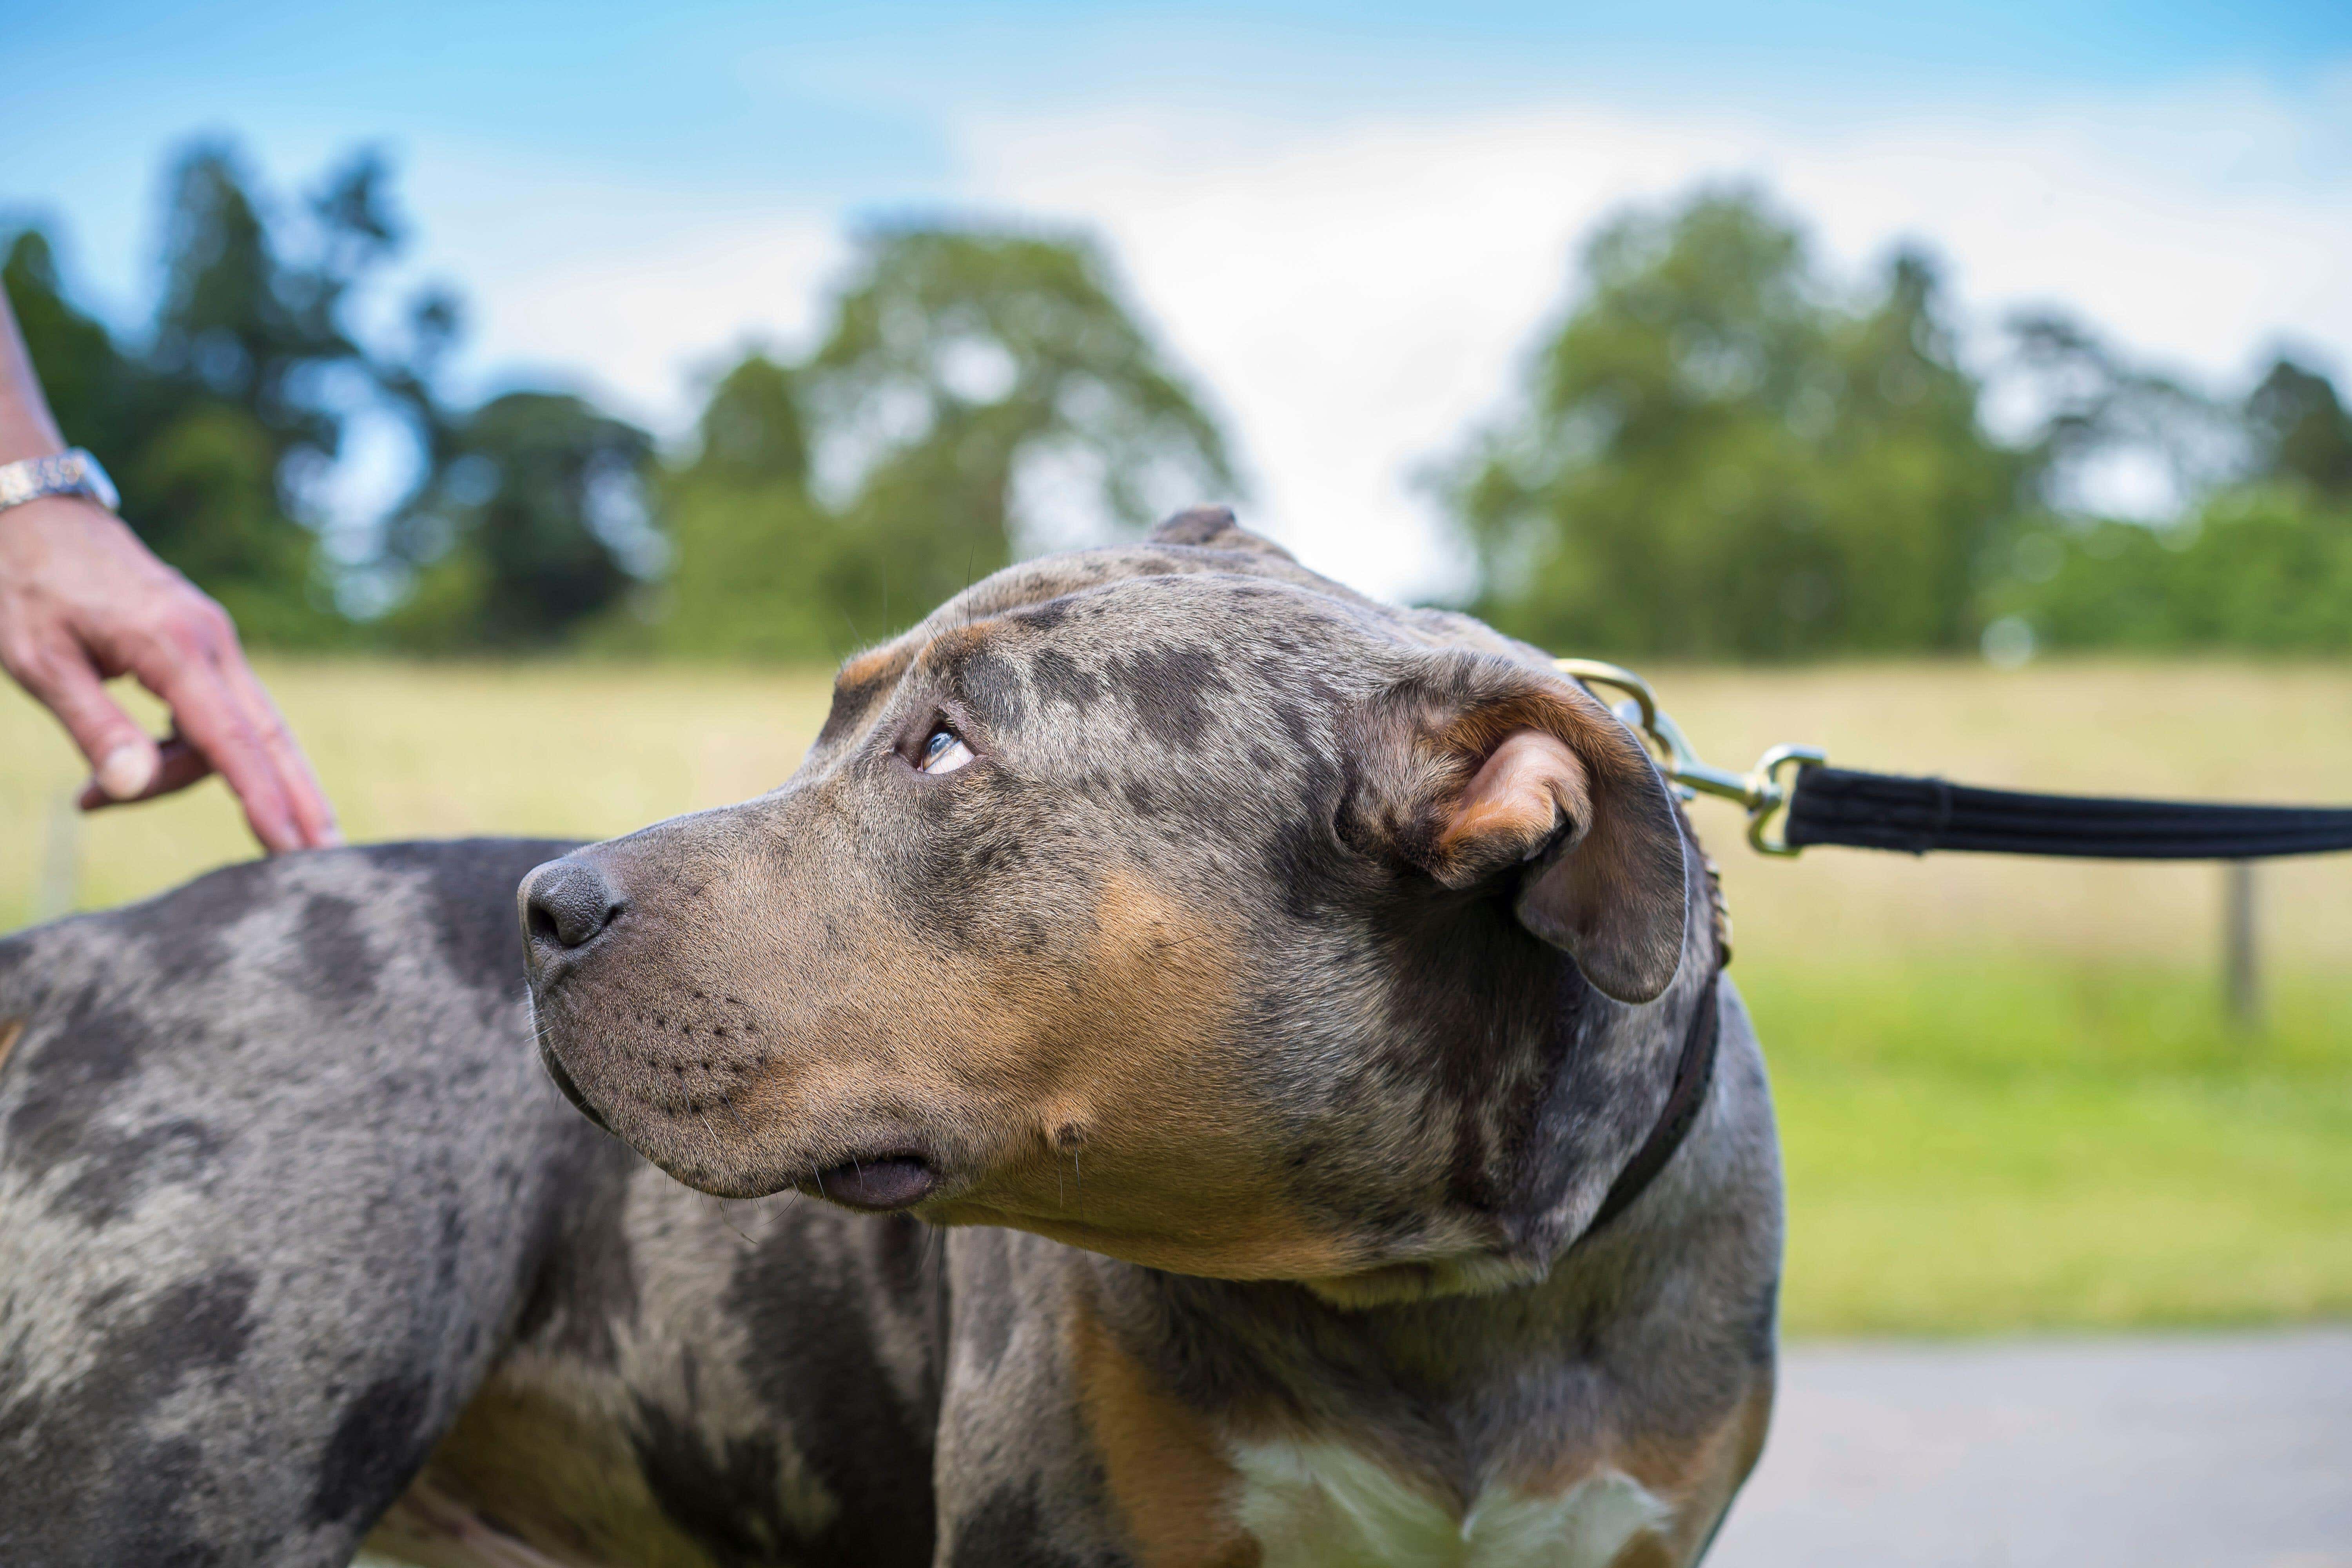 Rather than have their XL bullys put down, owners may now choose to keep their pets as ‘house dogs’ – with potentially disastrous consequences